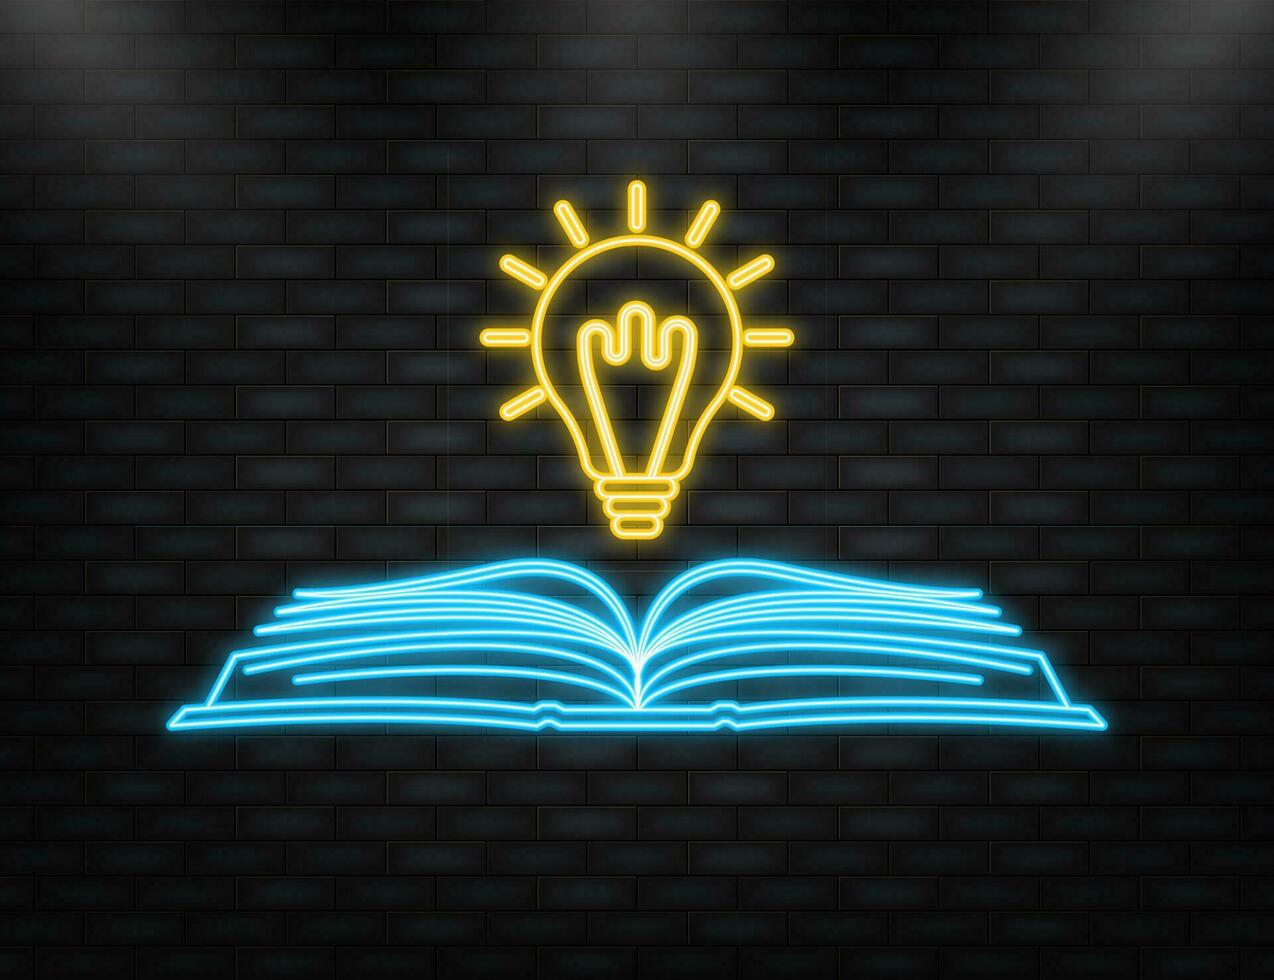 Ideas book on light bulb. Power of knowledge sign. Vector illustration.